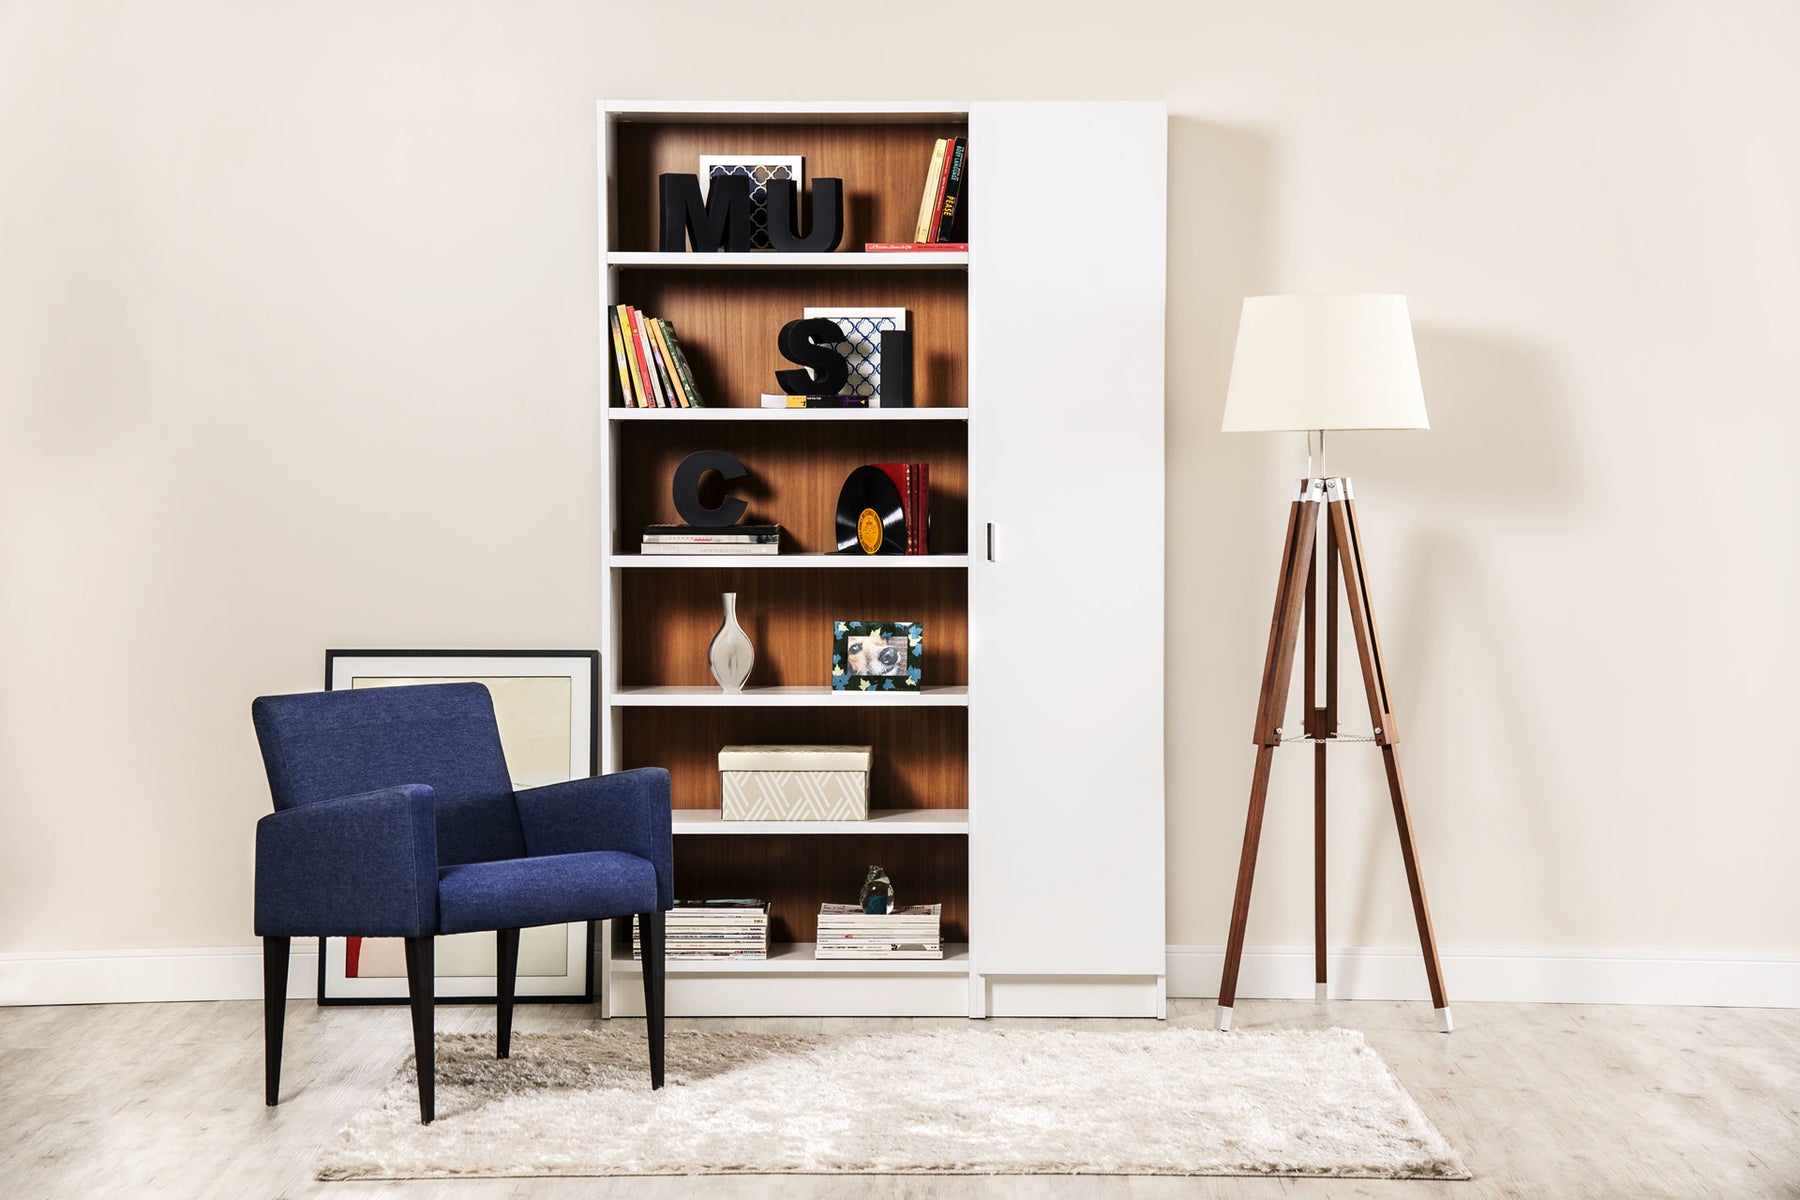 Manhattan Comfort Greenwich 2-Piece Bookcase 12 Wide and Narrow Shelves with 2 Narrow Doors in White Matte and Maple Cream-Minimal & Modern